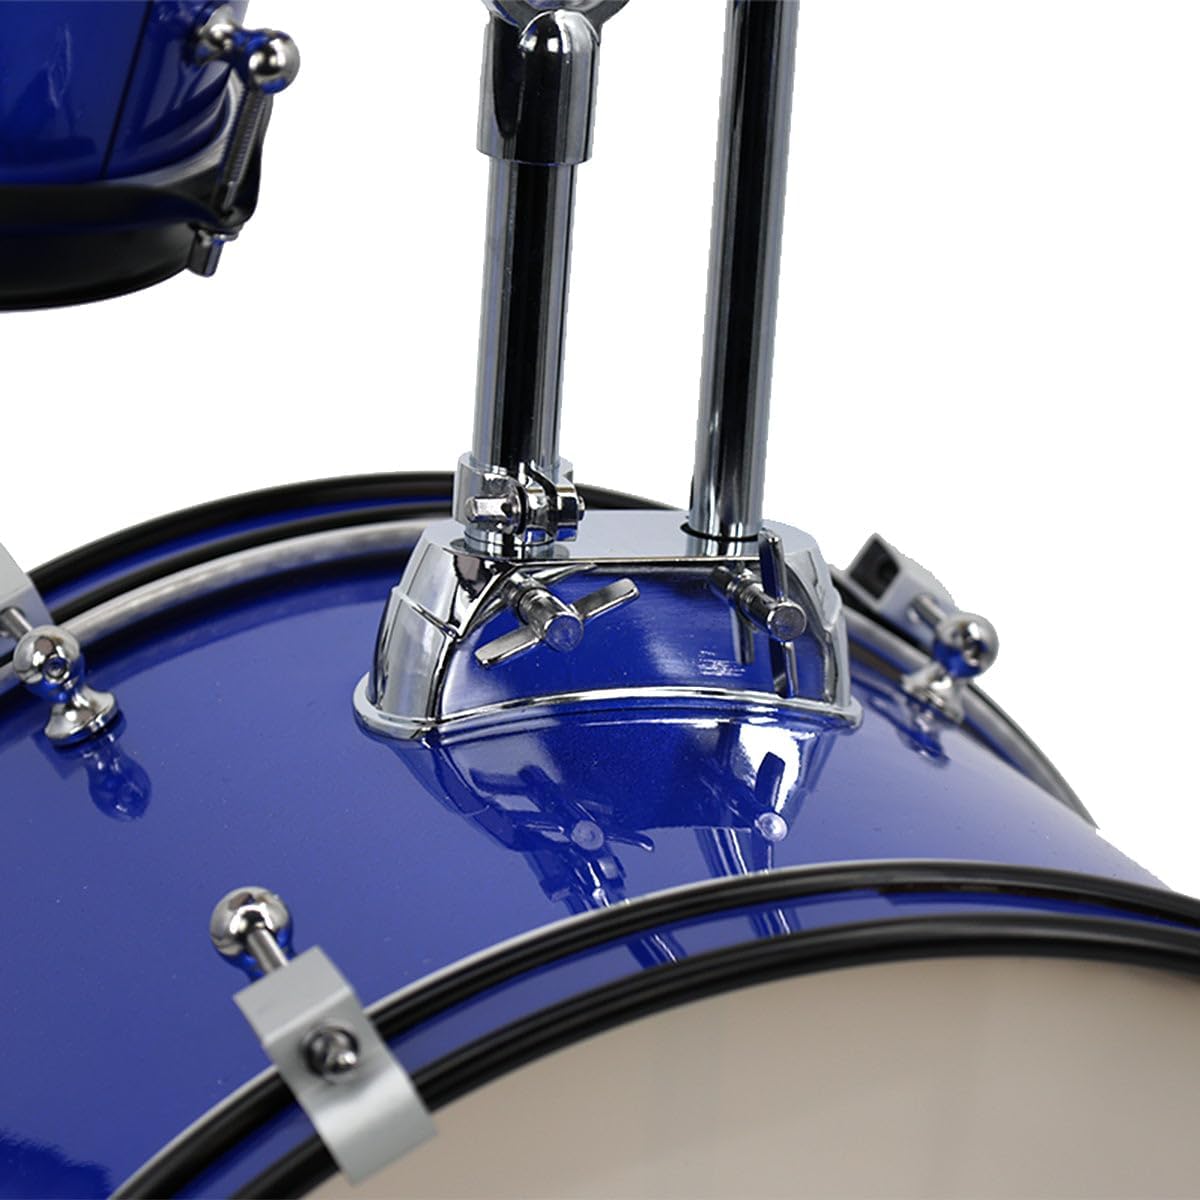 StarQuest SQ-DS-JR3-MBL Junior 3-Piece Drum Set – Premium Metallic Blue Finish – Perfect for Young Drummers and Beginners, High Quality